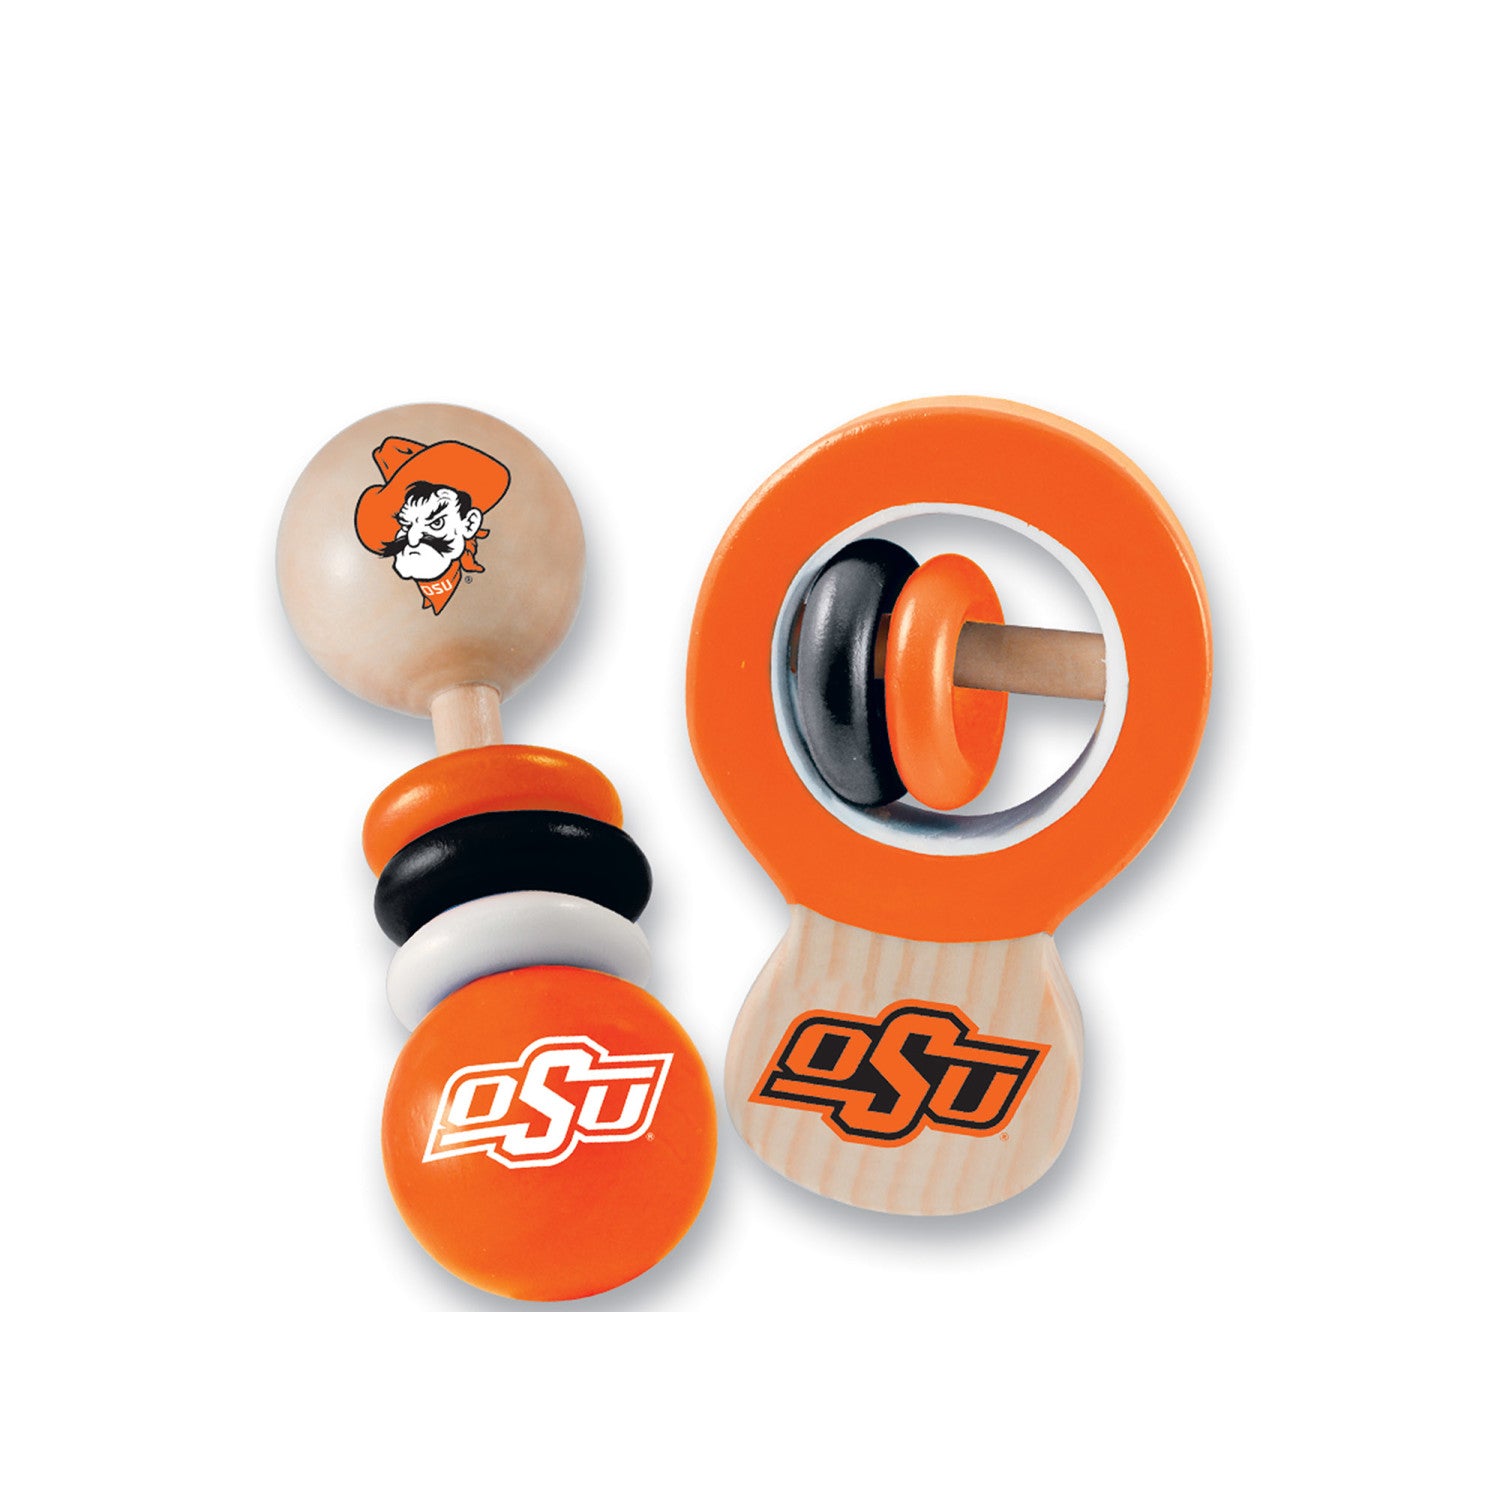 Oklahoma State Cowboys - Baby Rattles 2-Pack